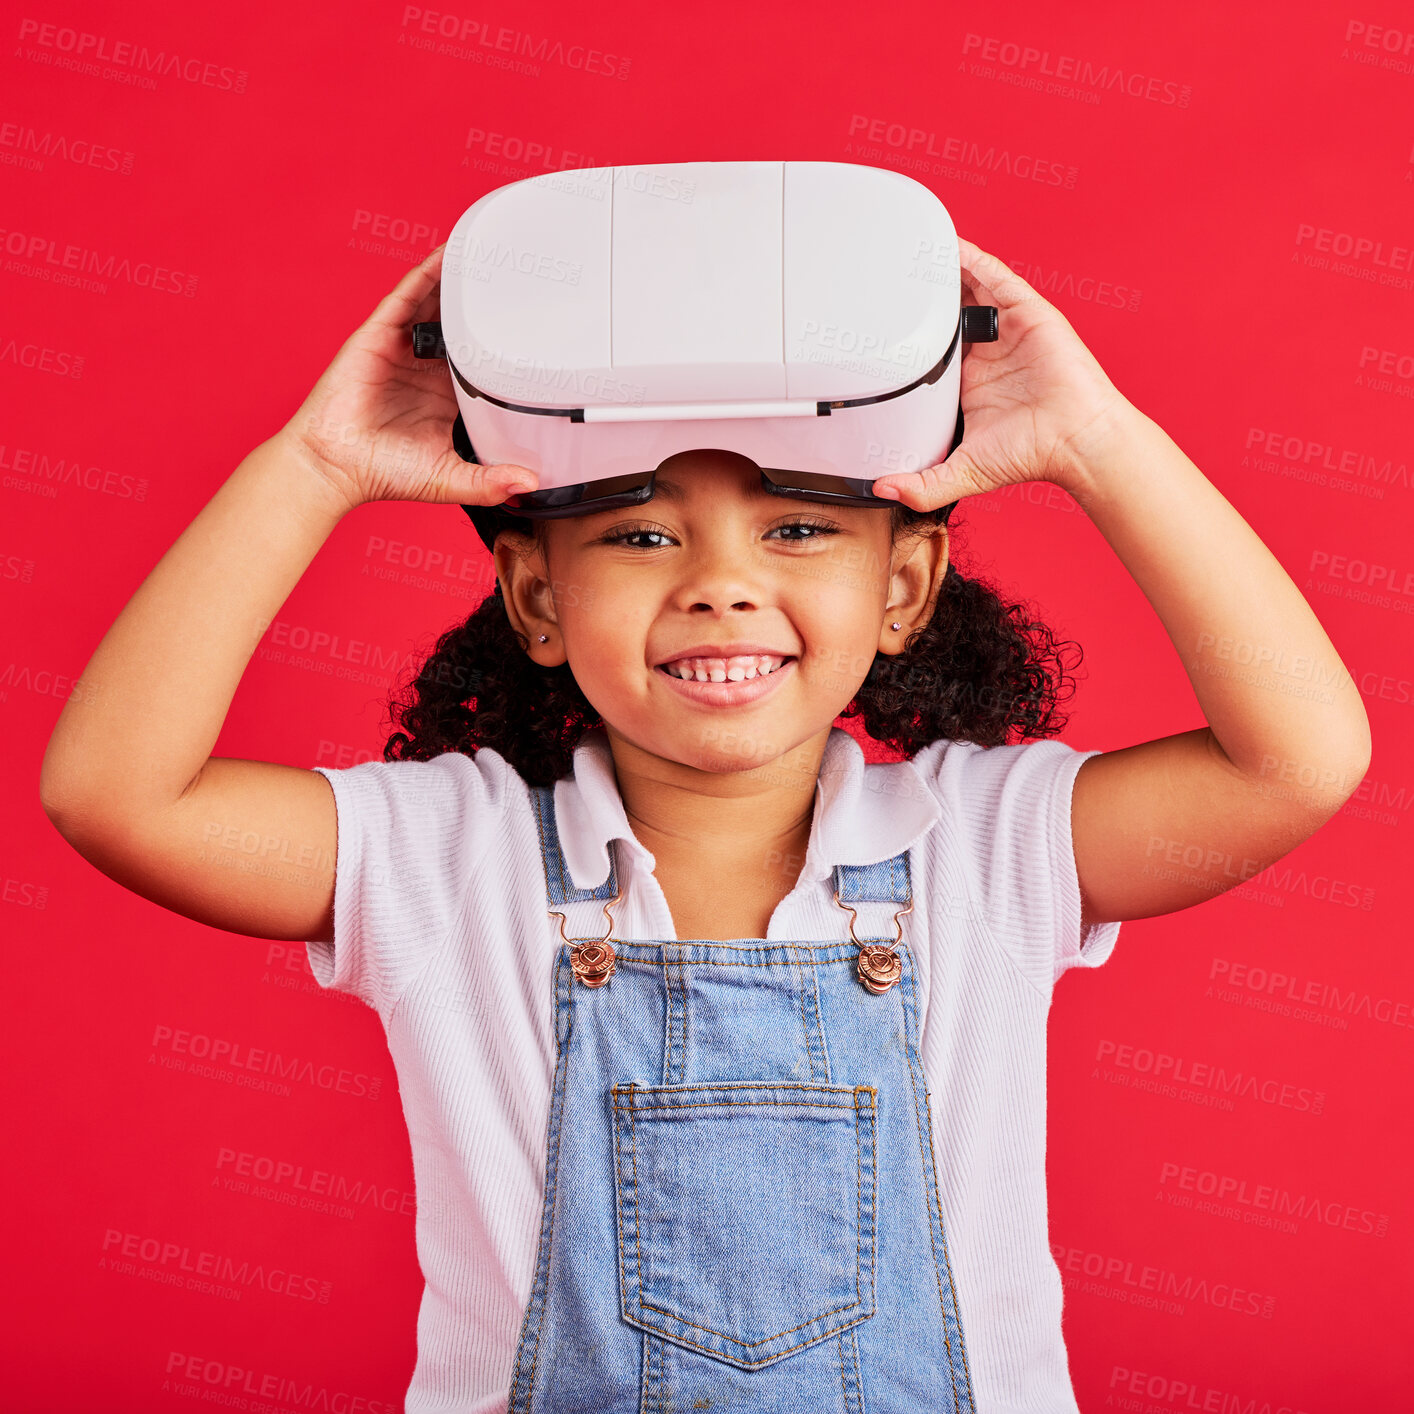 Buy stock photo Portrait, virtual reality or headset for children metaverse, 3d esports games or futuristic cyber gaming on red background. Smile, happy or playful kid and vr gamer technology for digital fantasy fun